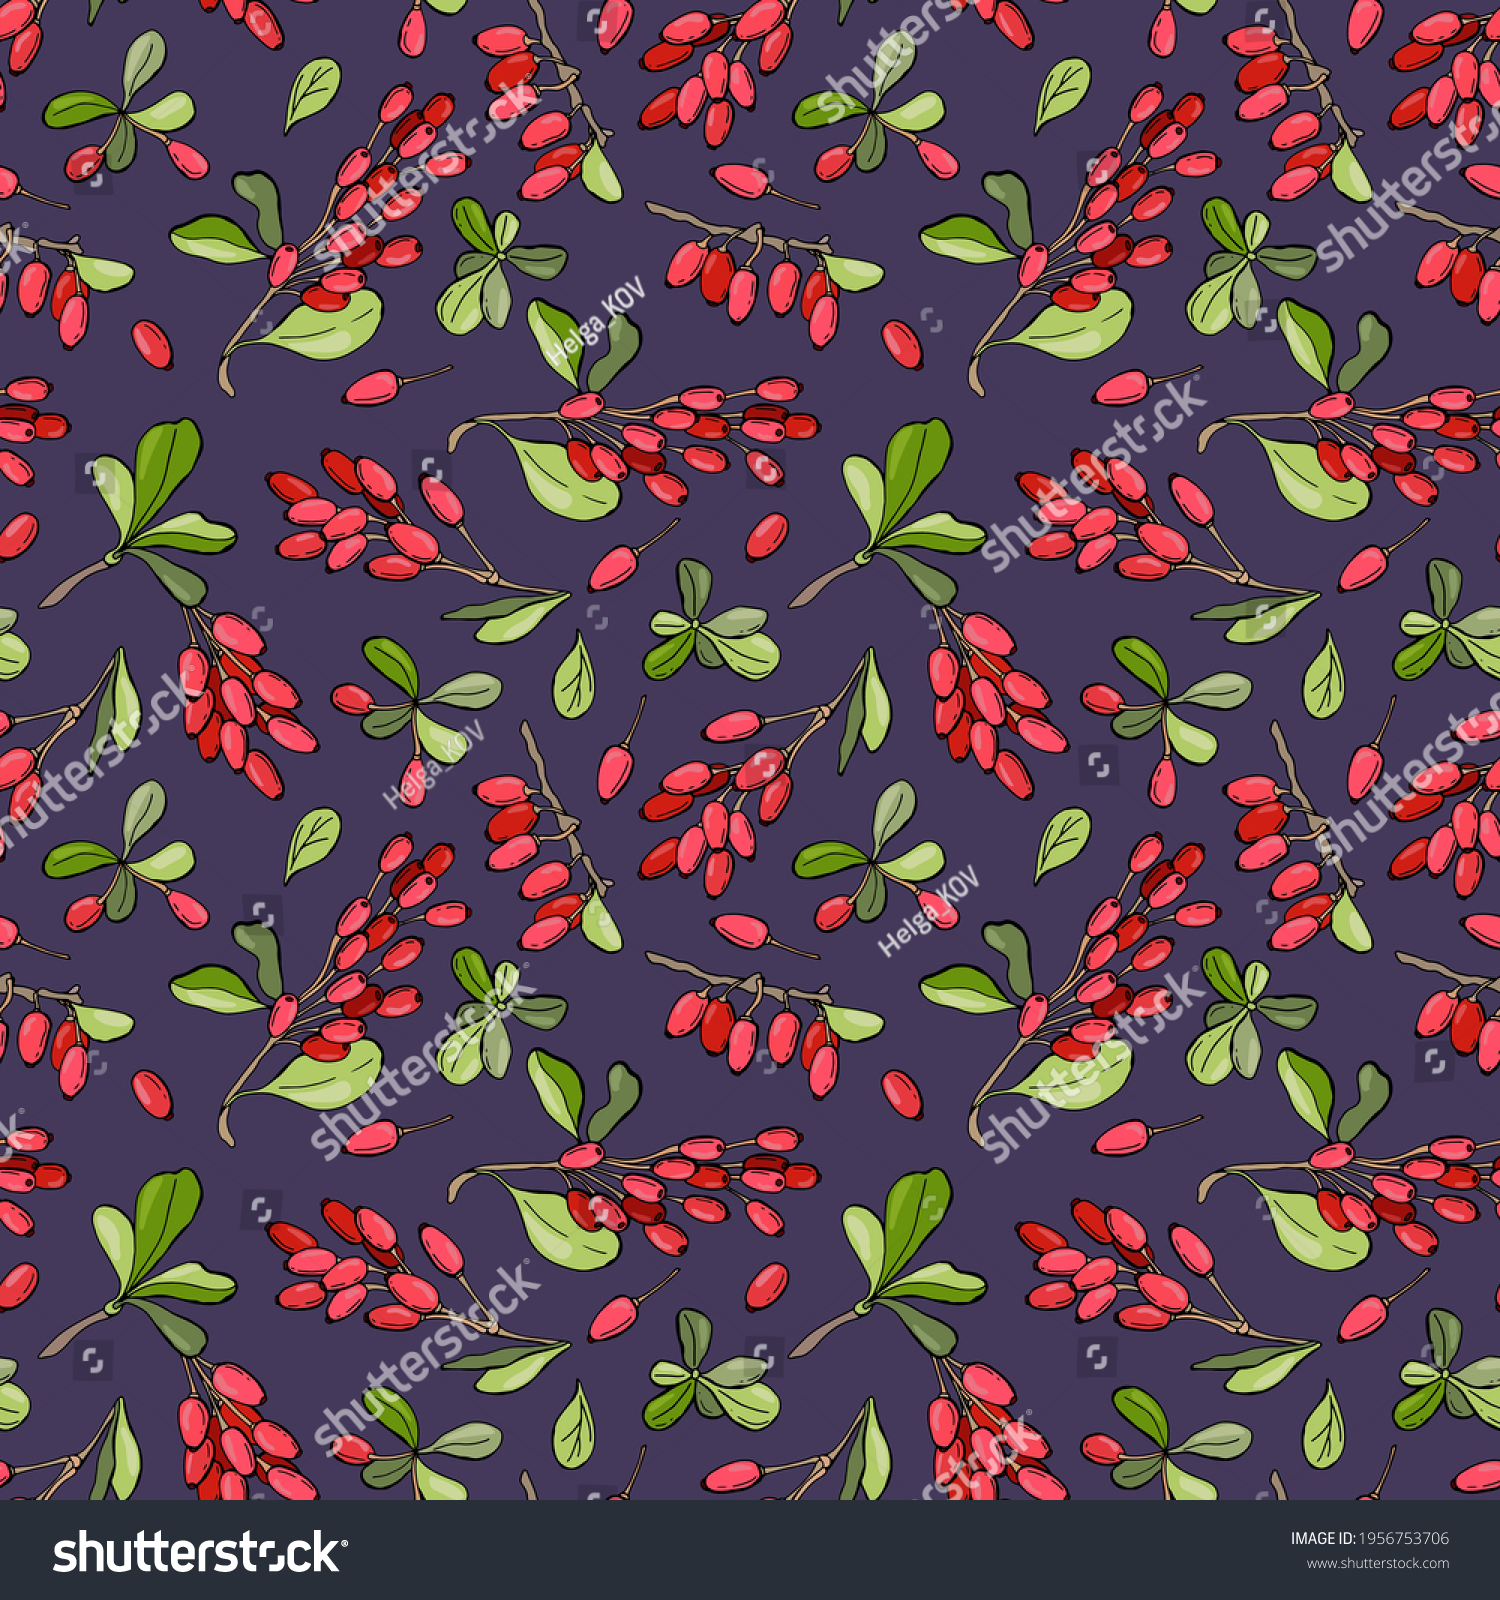 Barberry berries. Hand-drawn seamless pattern on a gray background. Design for fabric, textile, wallpaper, packaging.	
 #1956753706